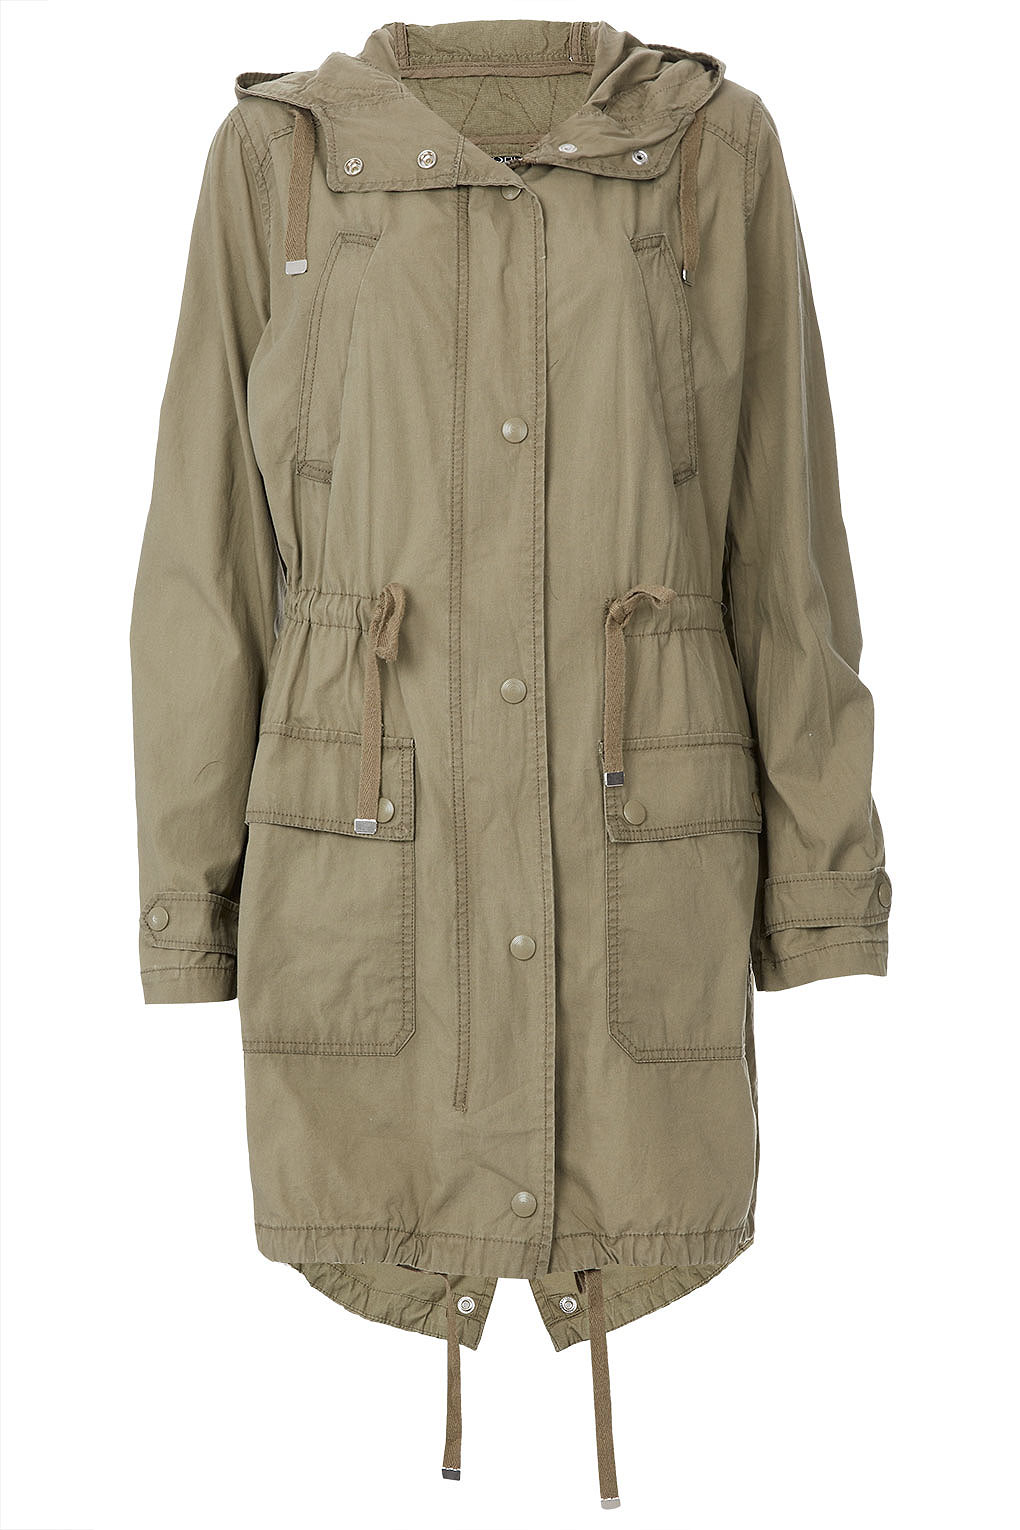 Lyst - Topshop Unlined Parka in Natural